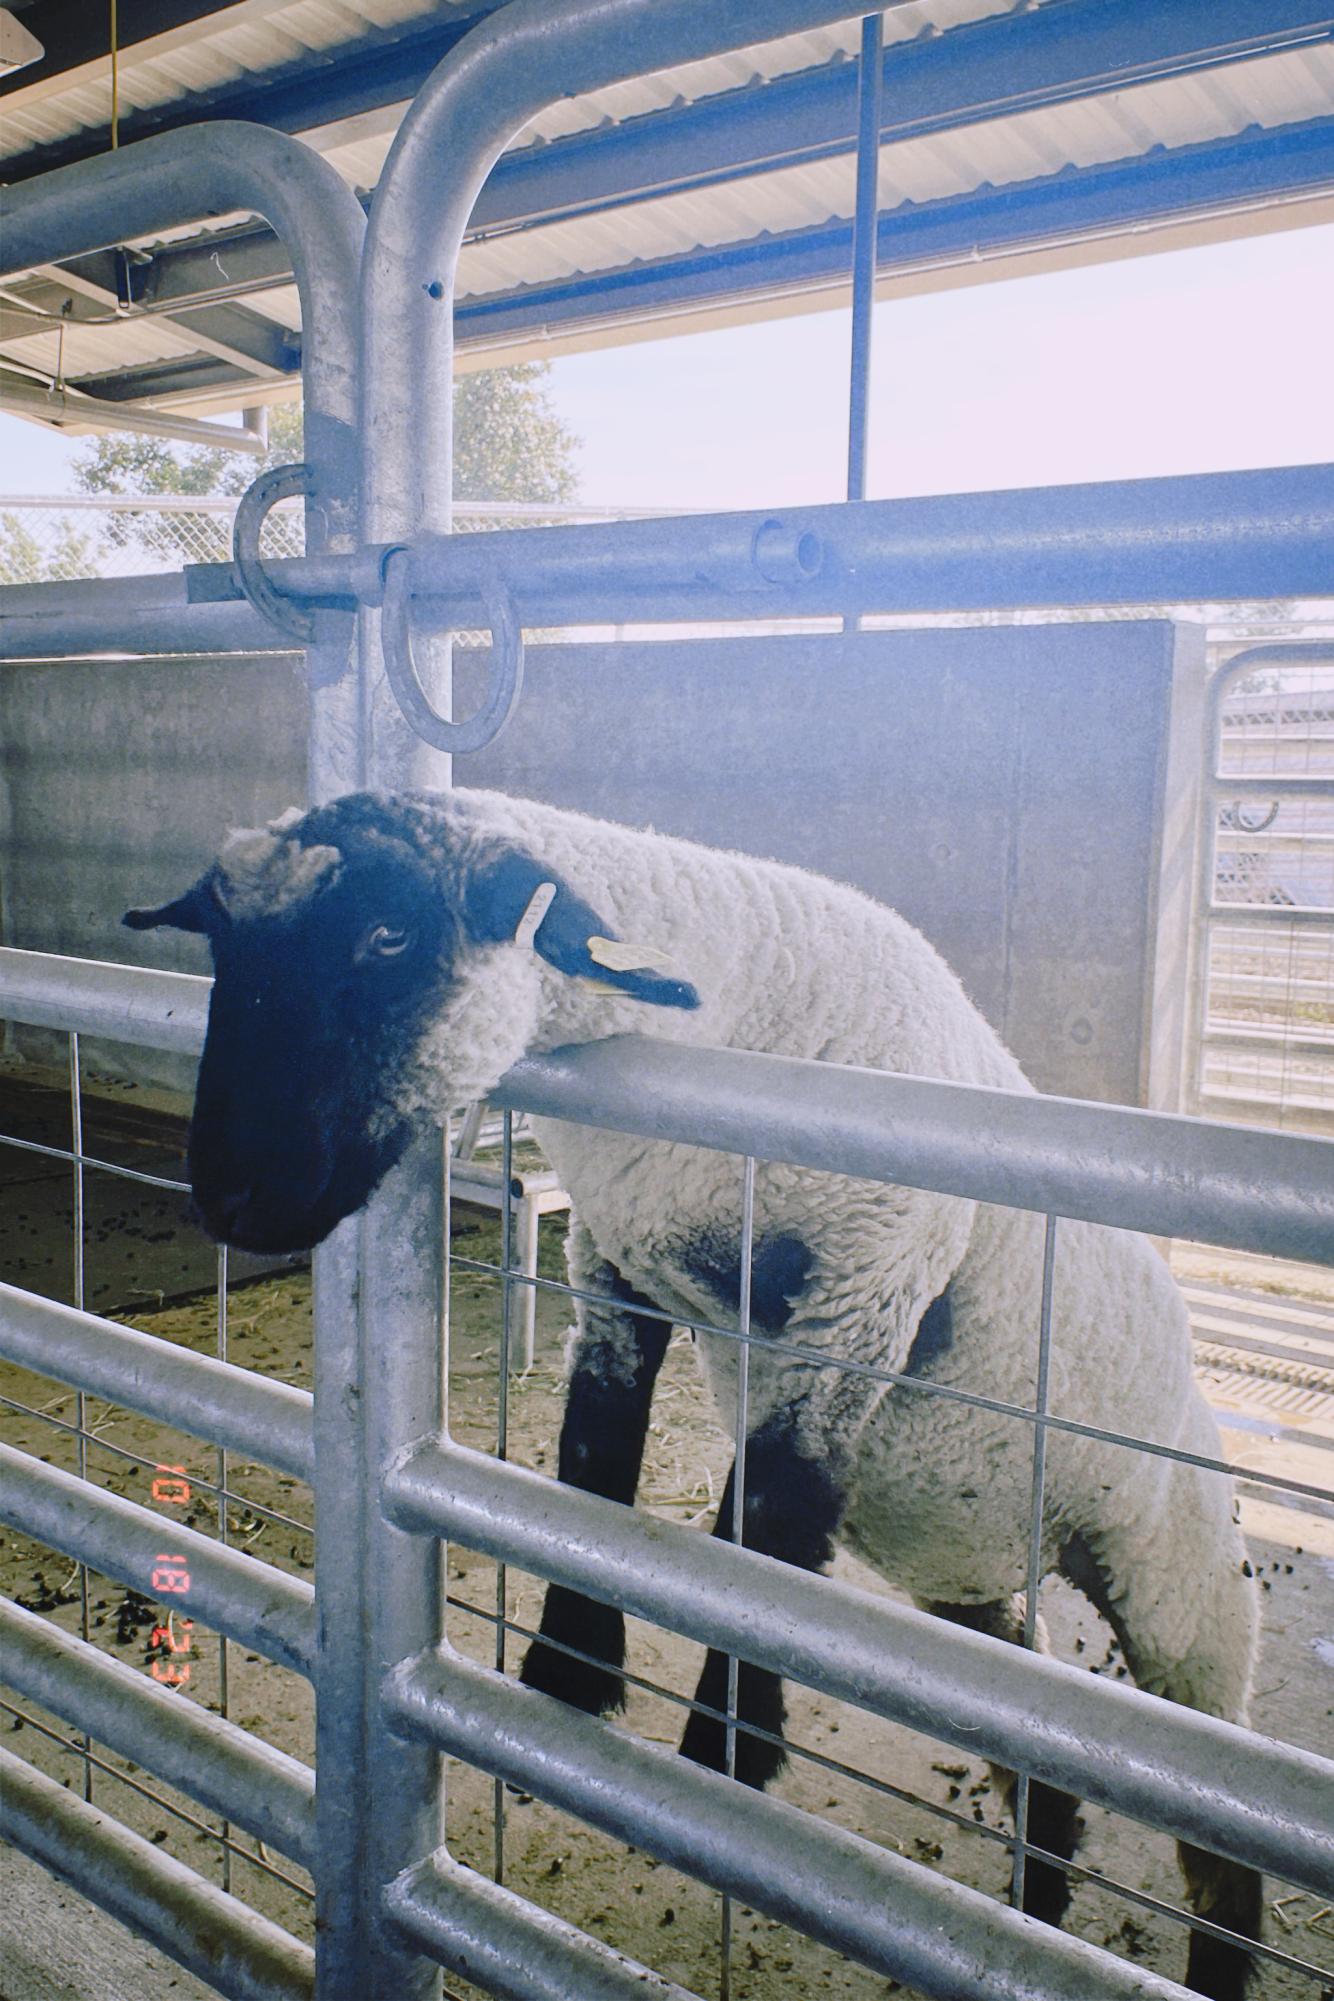 In the sheep, goat and pig barn, a sheep named Mazie resides in the barn. She climbs on the railing to get fed and pet.